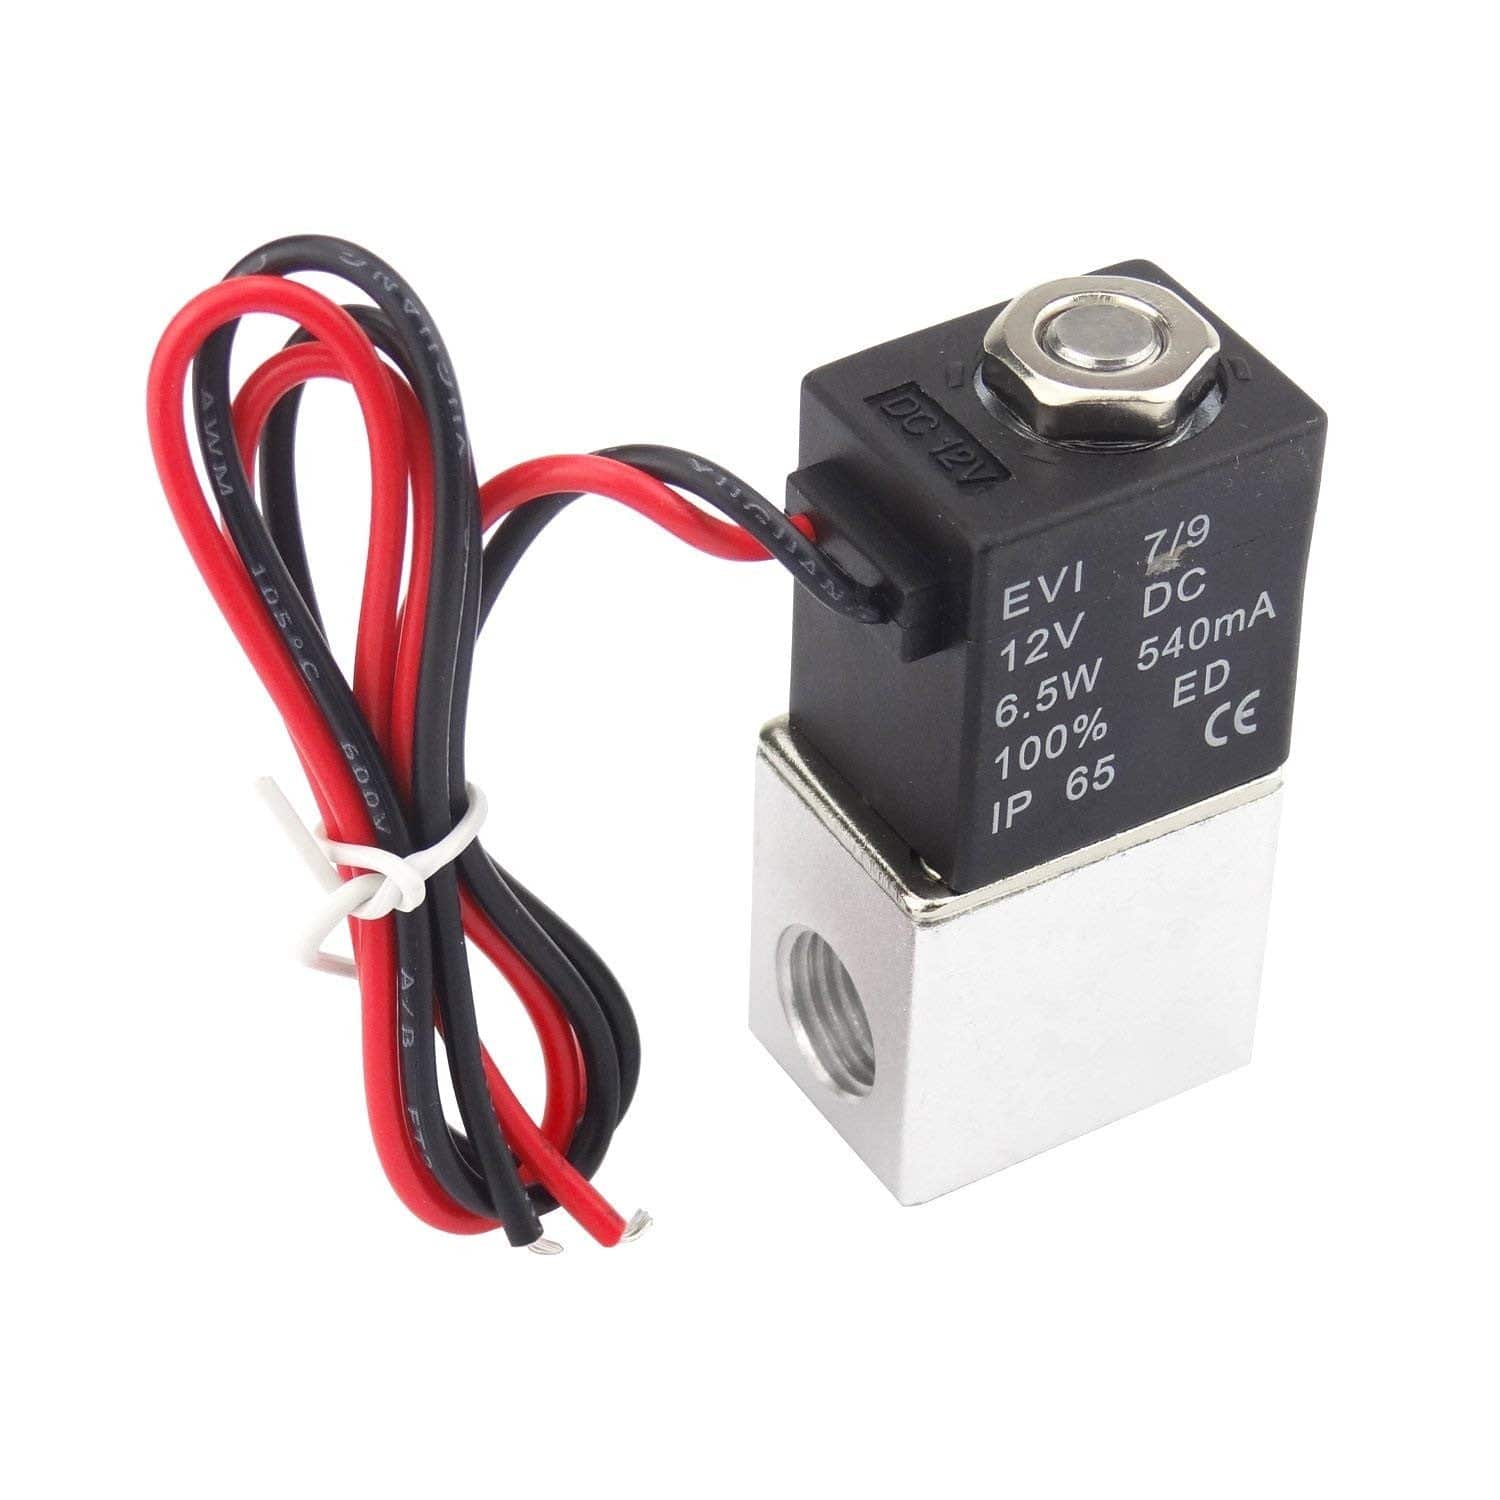 DC 12V Solenoid Valve 1/4 inch 2 Way Normally Closed Direct-Pneumatic Valves For Water Air Gas Hot- RS2934 - REES52